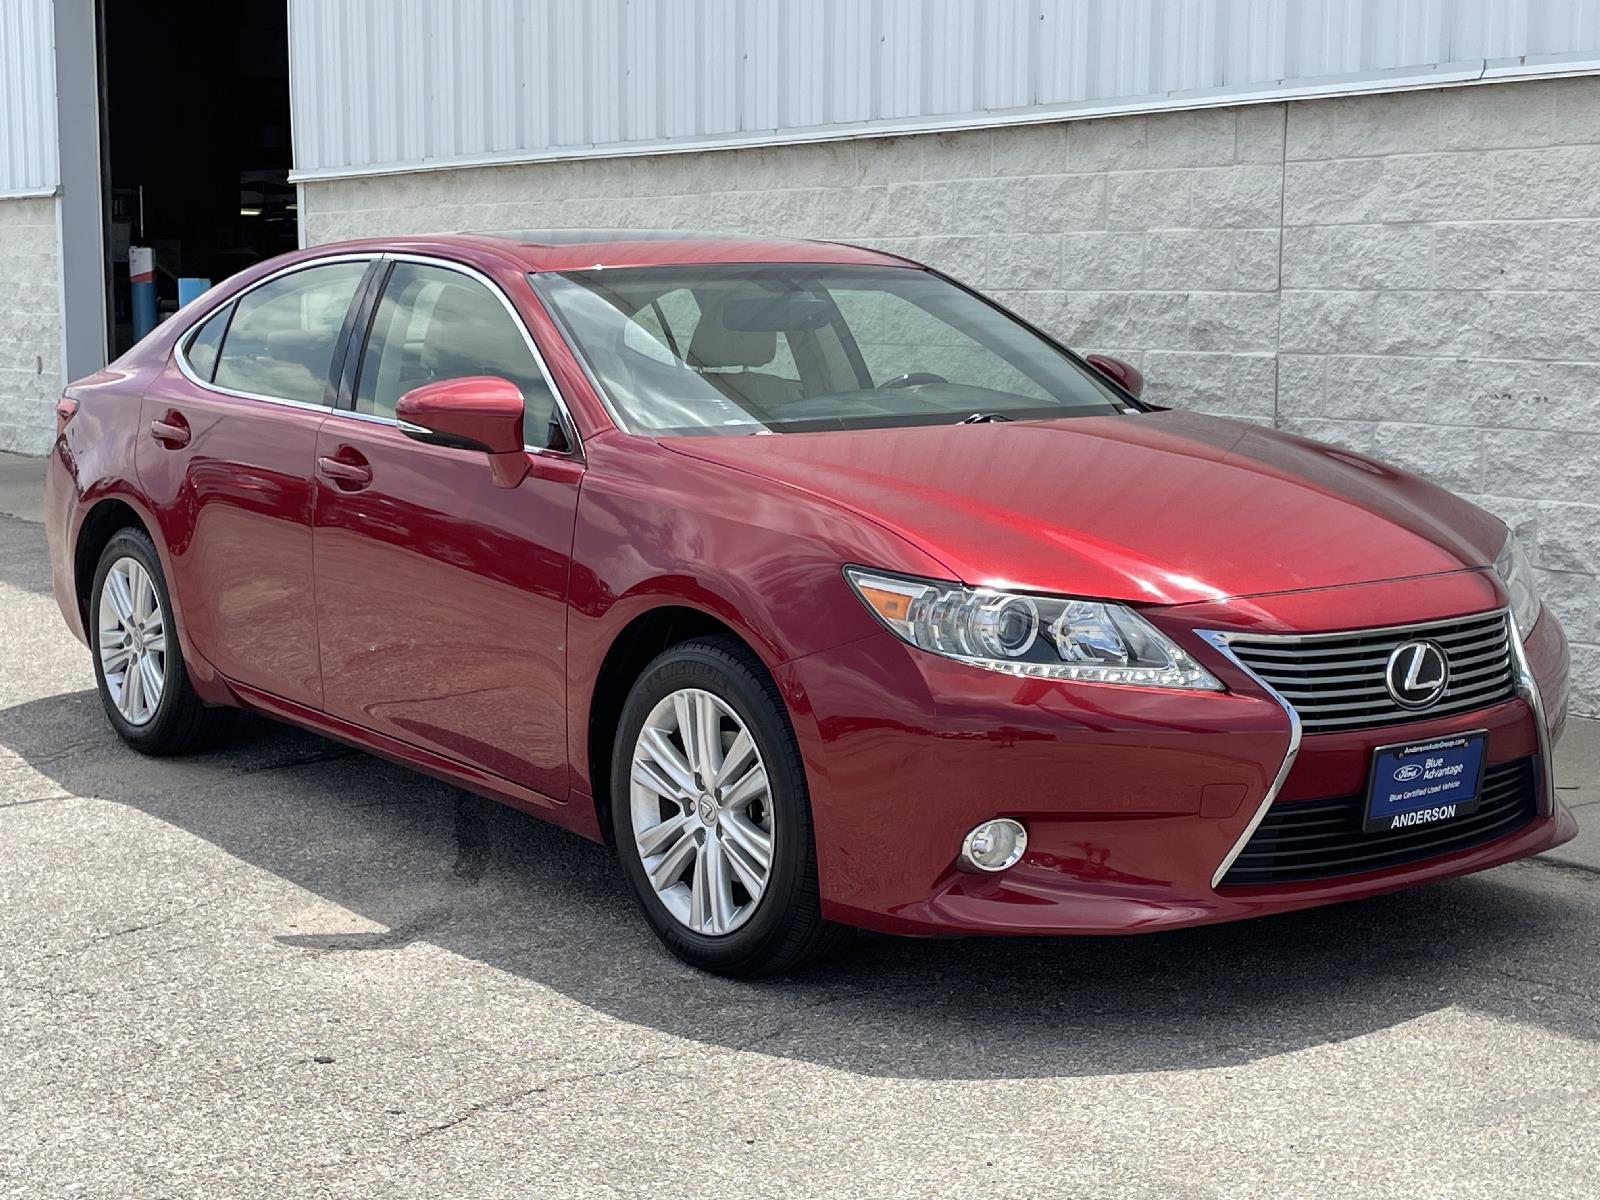 Used 2015 Lexus ES 350 Crafted Line Sedan for sale in Lincoln NE